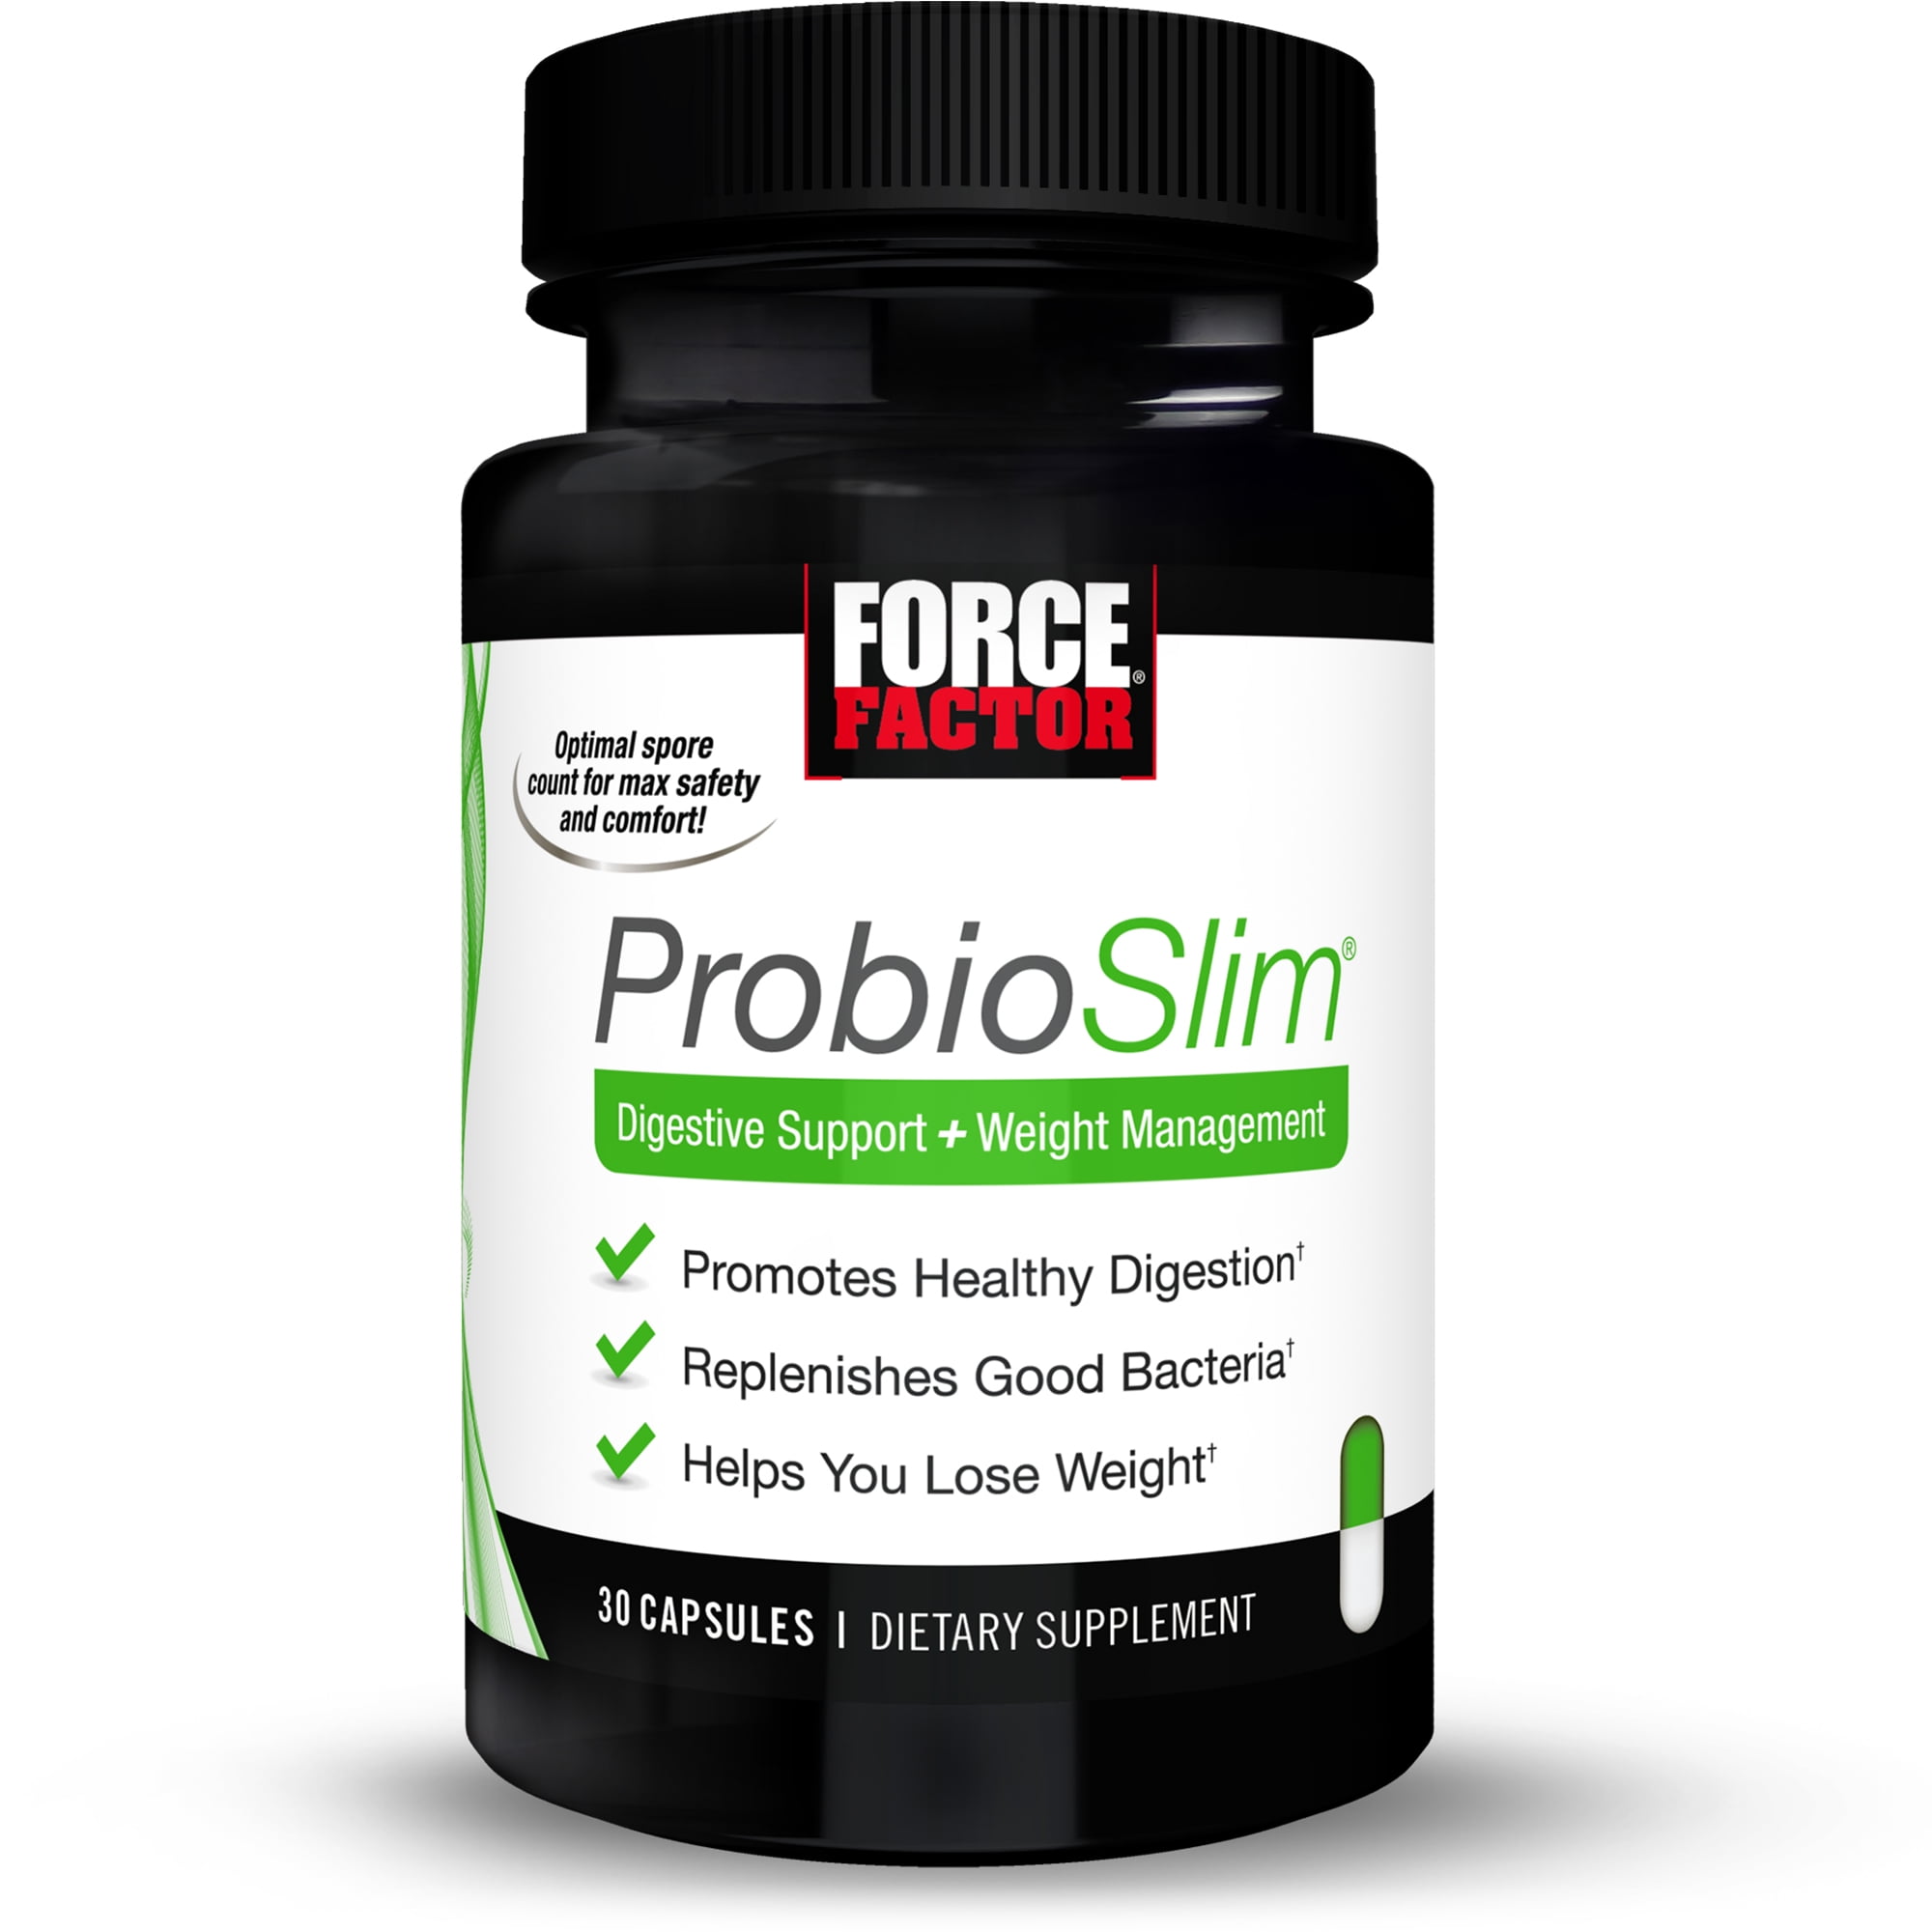 Force Factor ProbioSlim Probiotic and Weight Loss Supplement for Women and Men with Probiotics, Burn Fat, Lose Weight, Reduce Gas, Bloating, Constipation, and Support Digestive Health, 30 Capsules